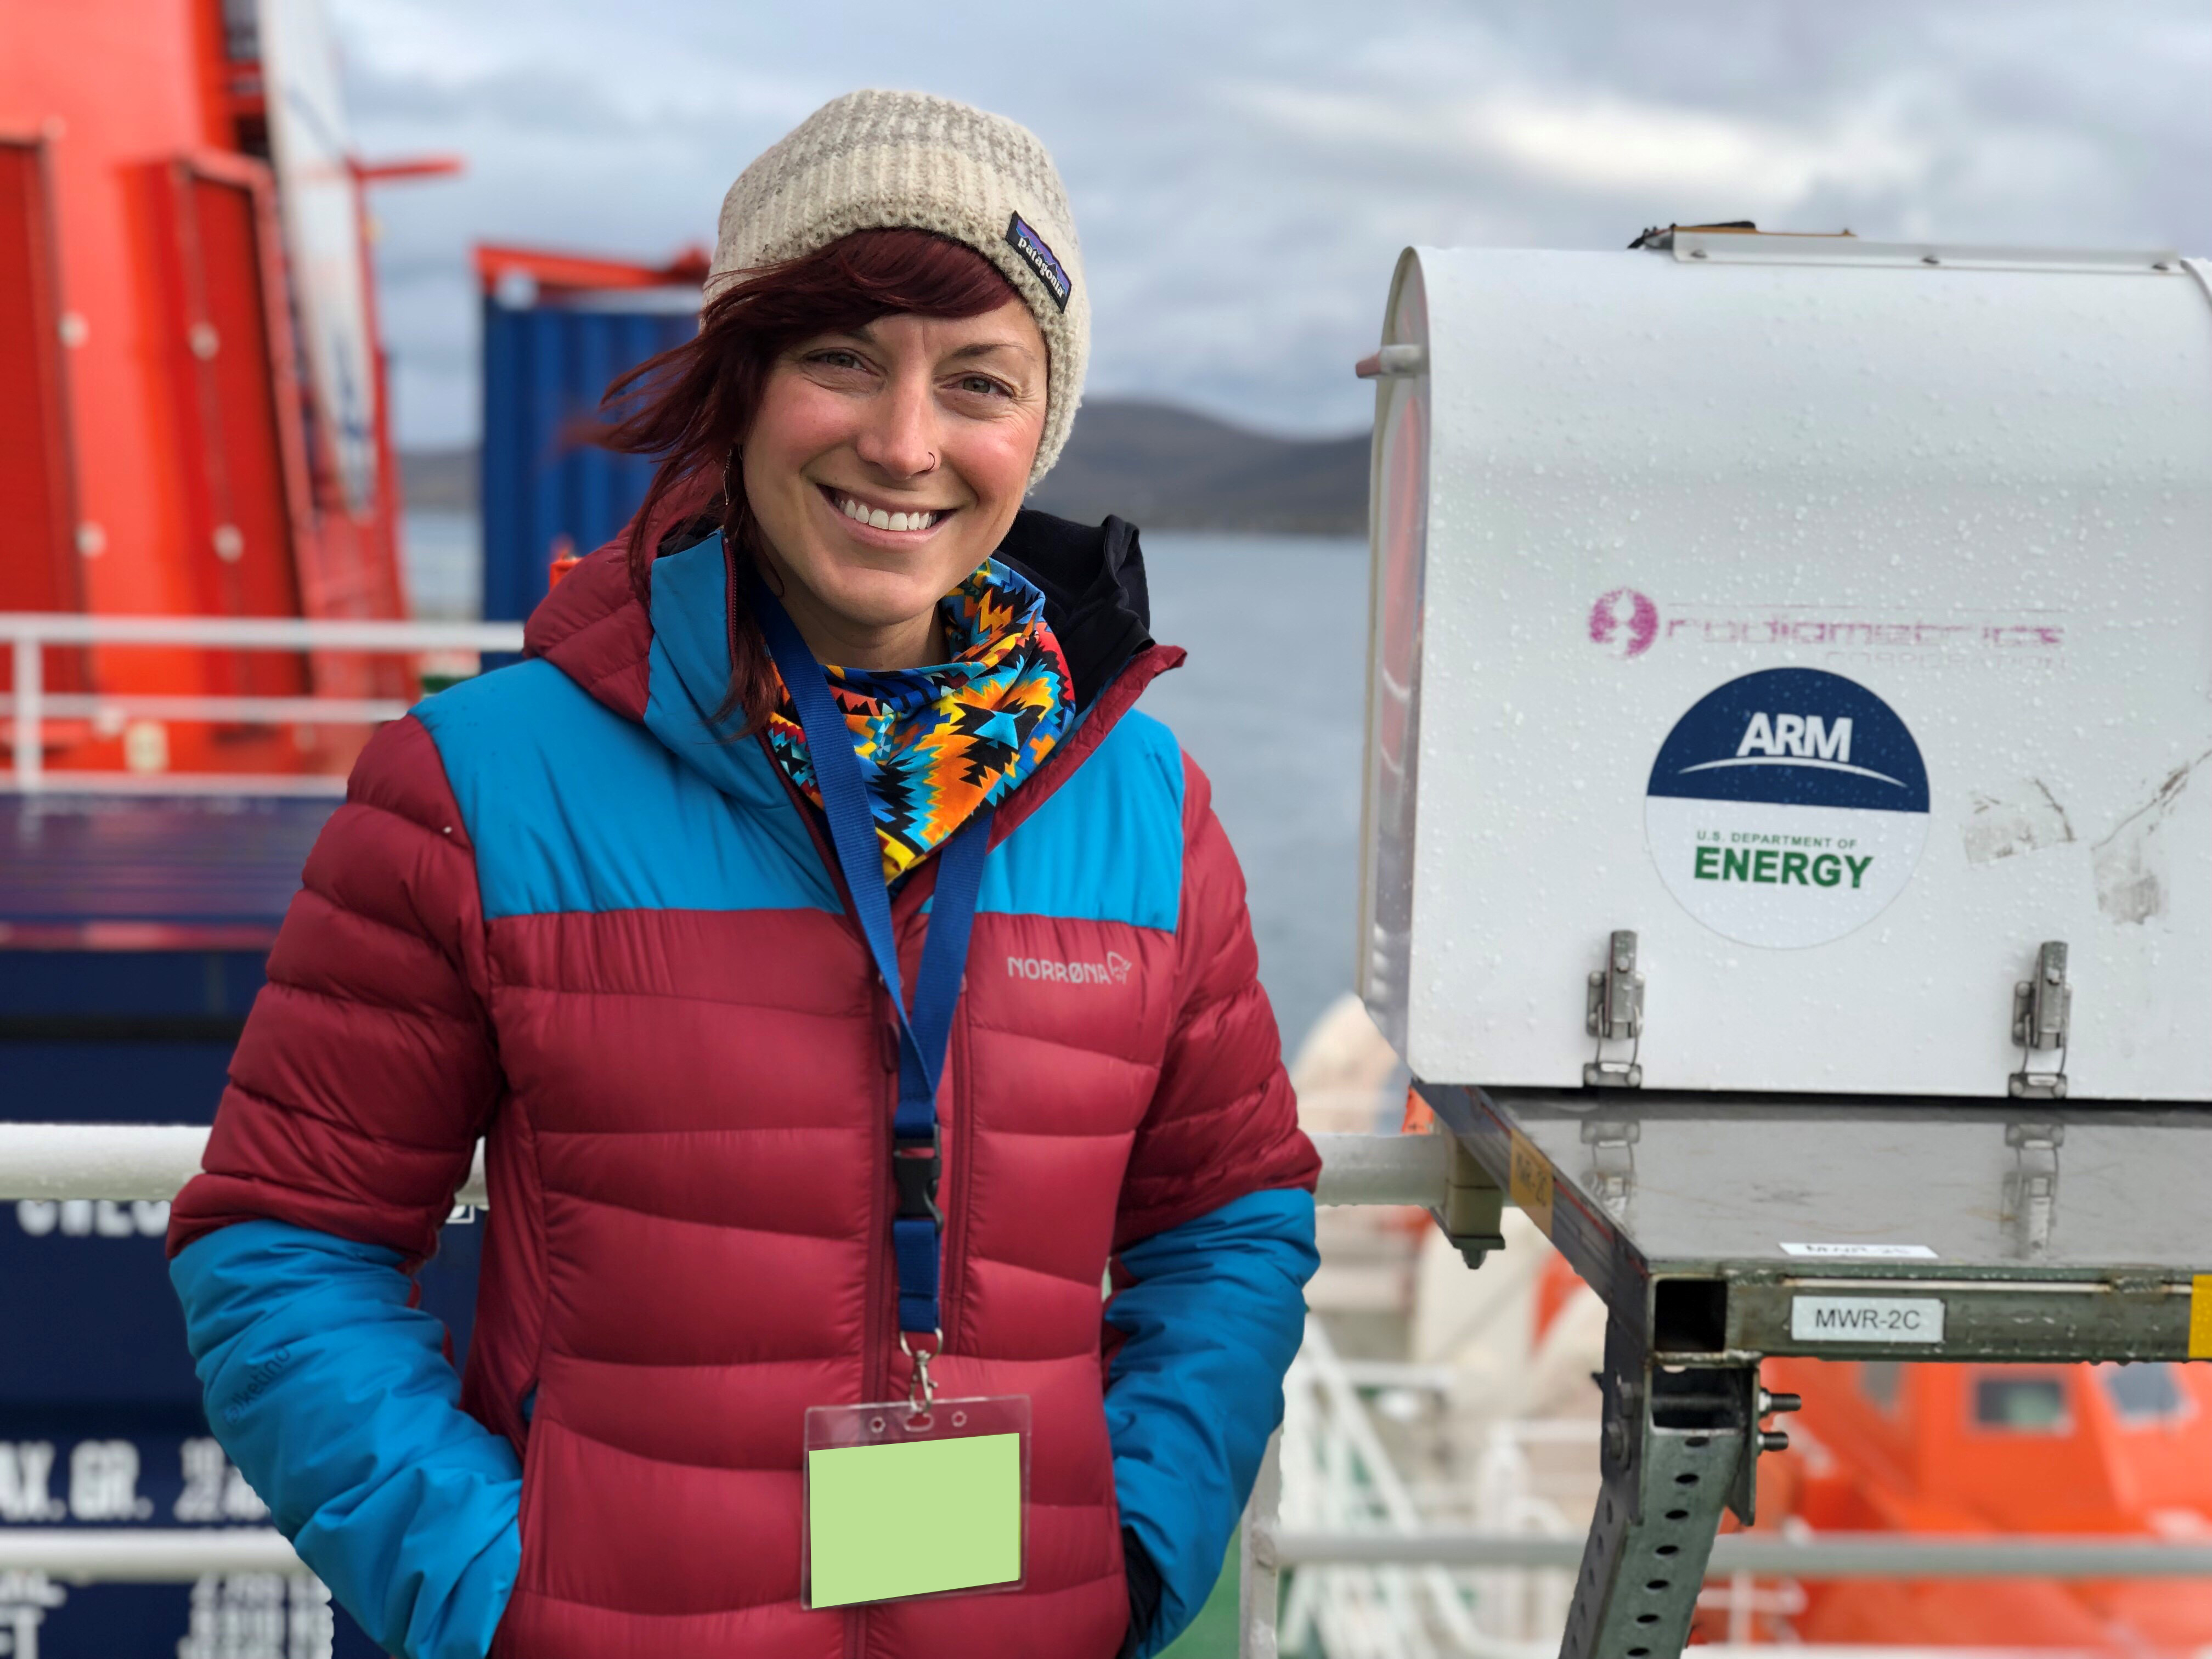 Wearing a red-and-blue jacket and beige beanie, Jessie Creamean stands next to a 3-channel microwave radiometer before embarking on the MOSAiC expedition in 2019.